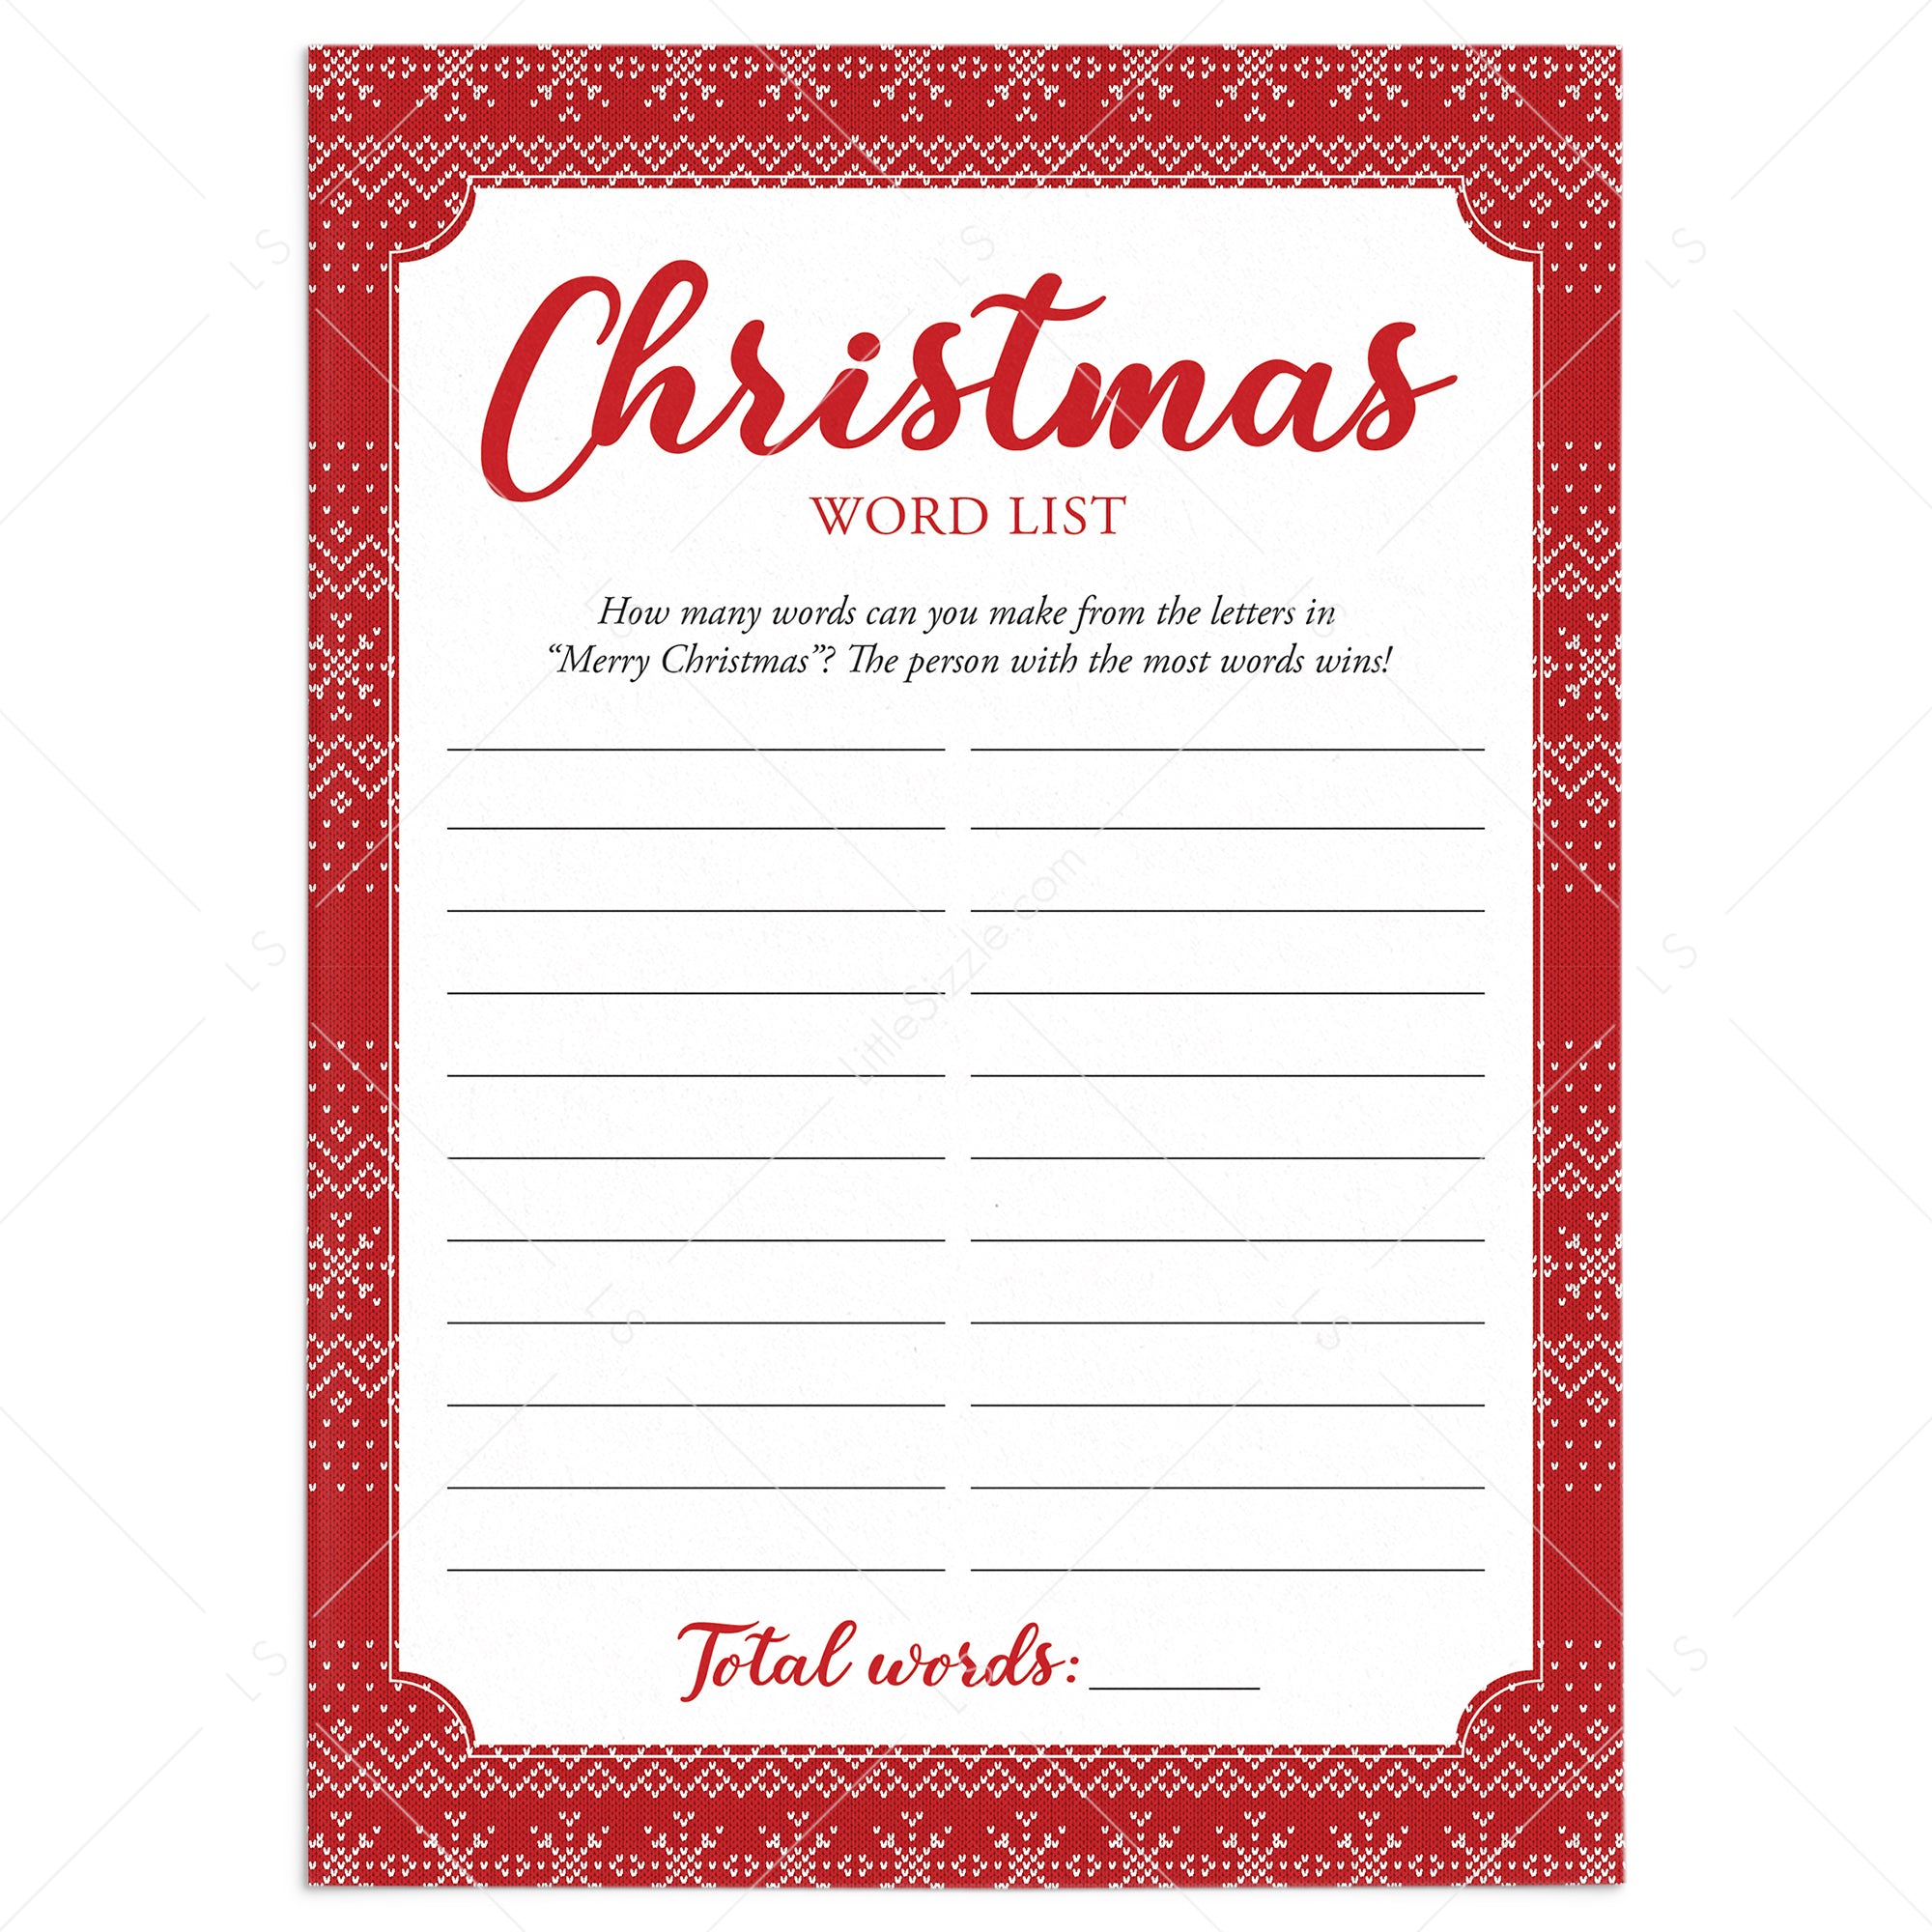 Christmas Word List Holiday Game for Families Printable by LittleSizzle